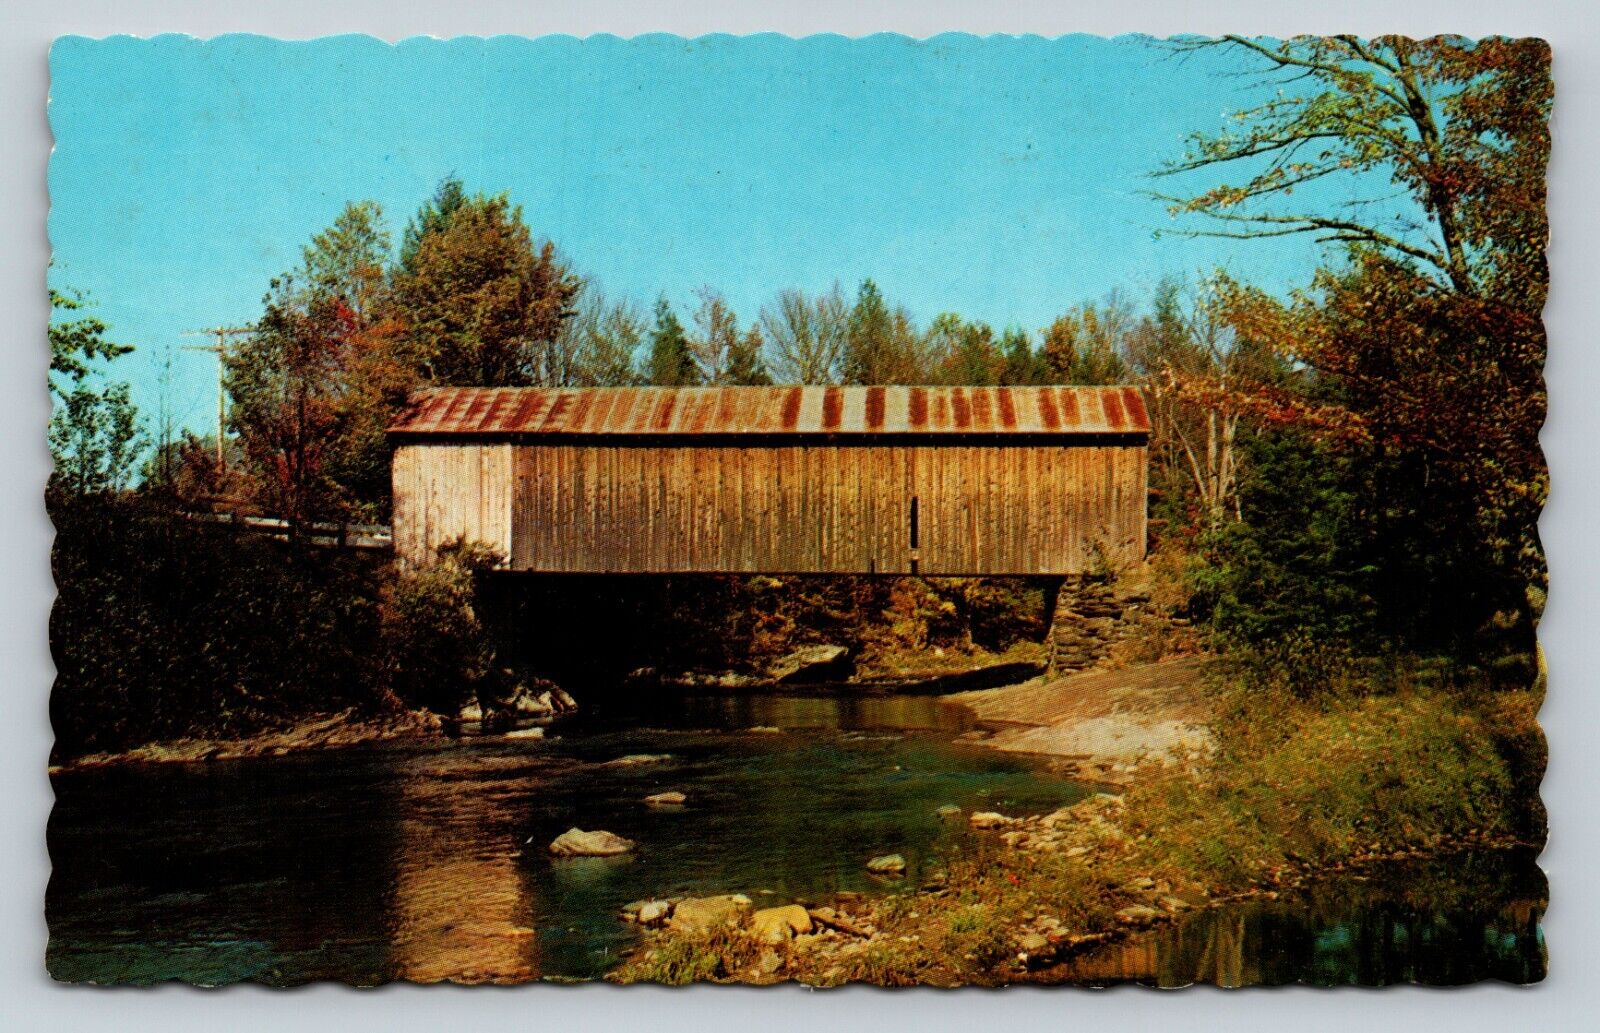 Covered Bridge Near Waterville Vermont Over Lamoille River VINTAGE Postcard